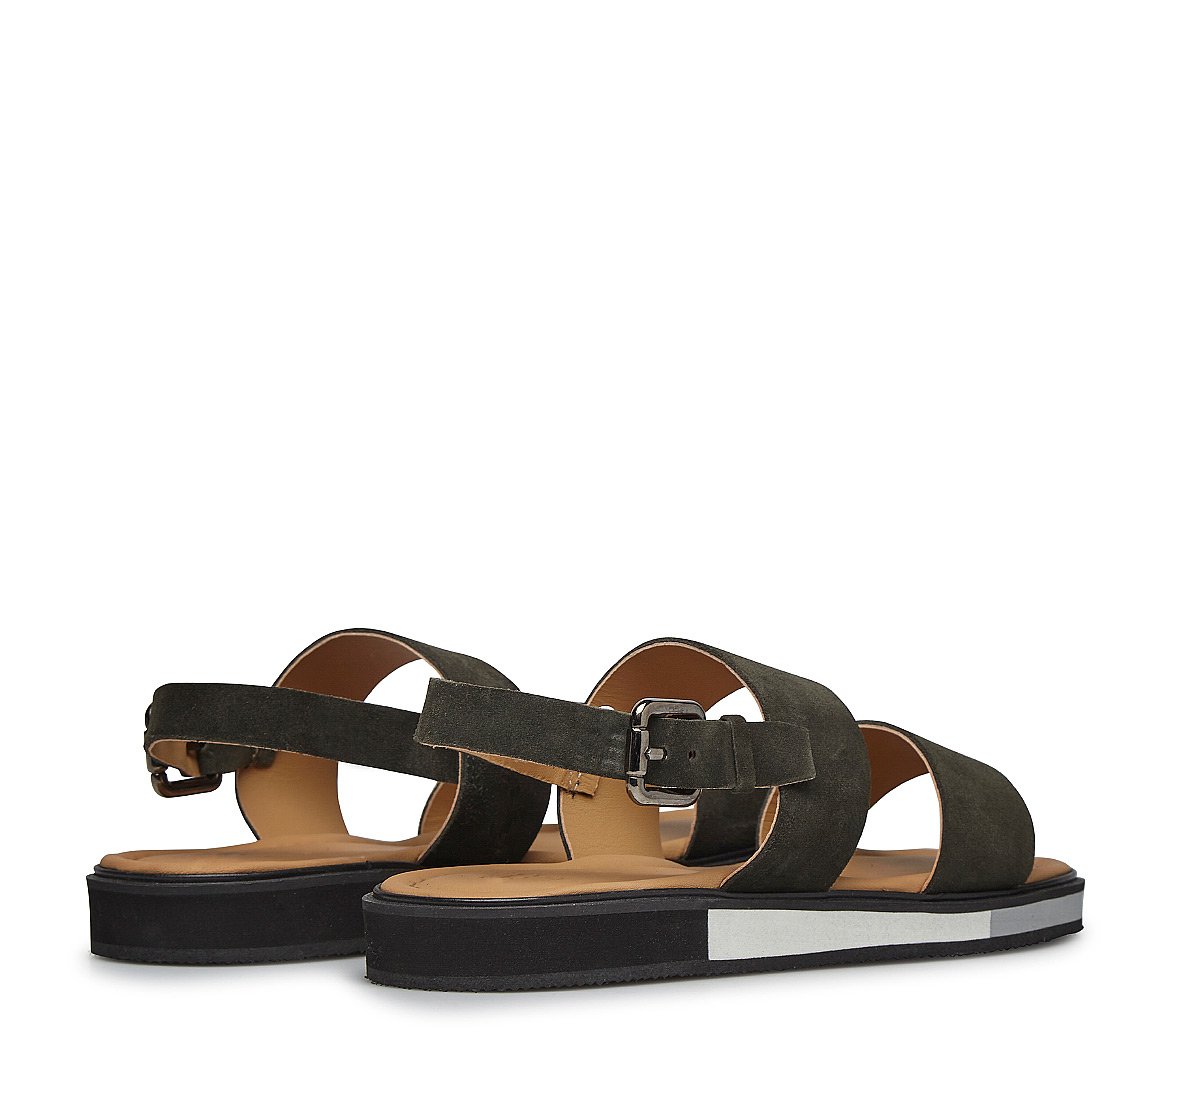 Sandal in suede